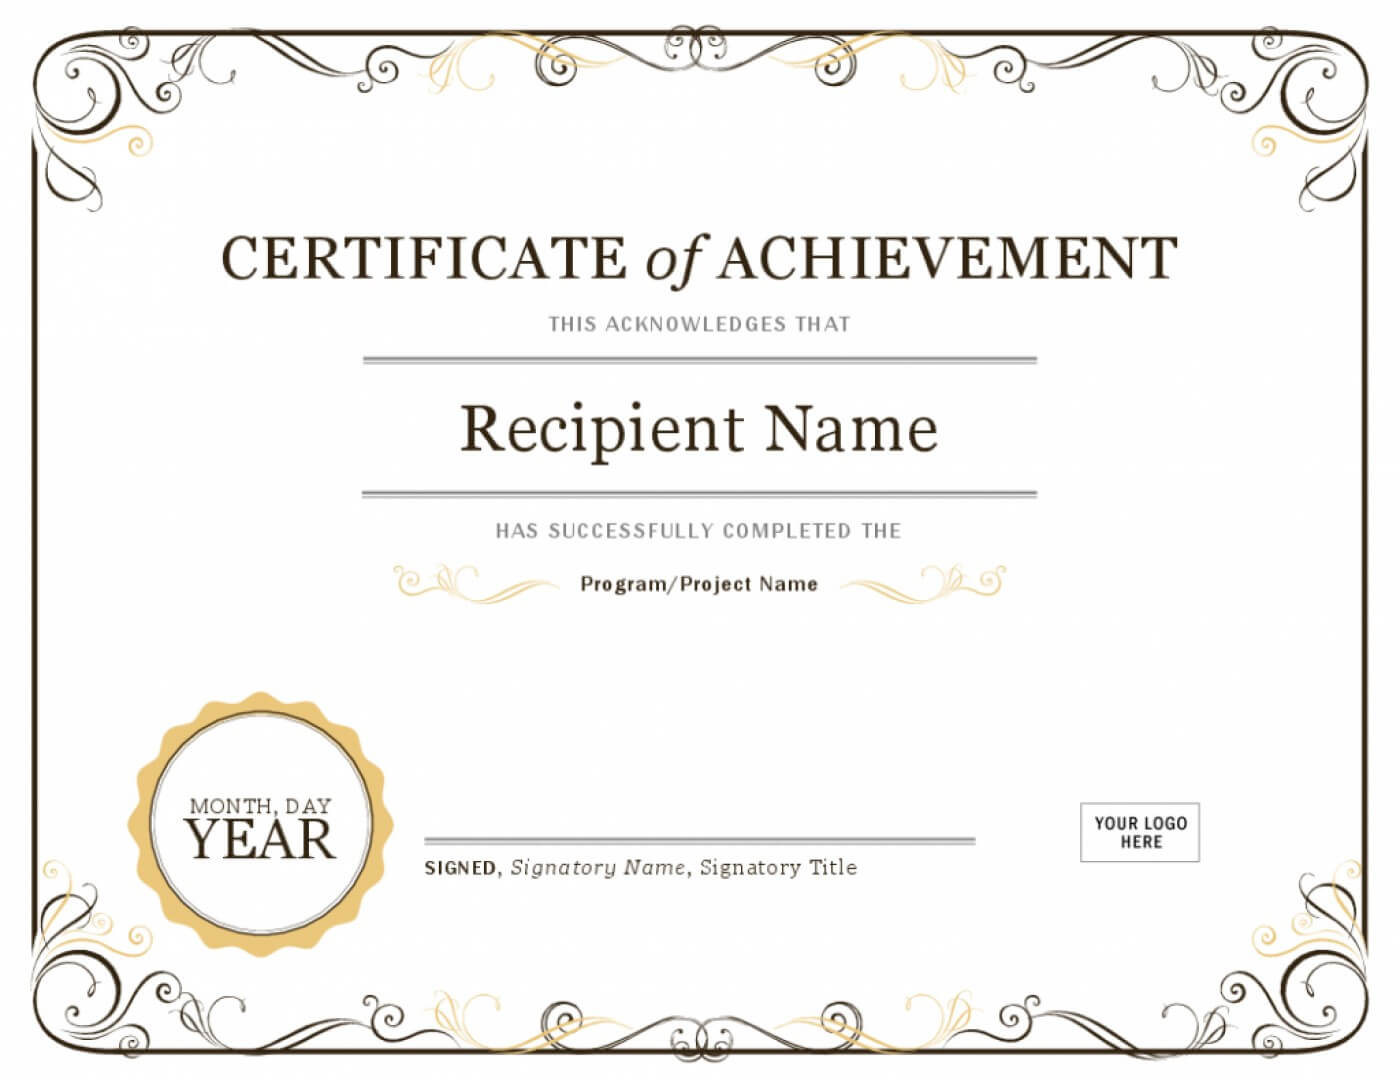 037 Certificate Of Appreciation Templateording Army Examples With Regard To Teacher Of The Month Certificate Template